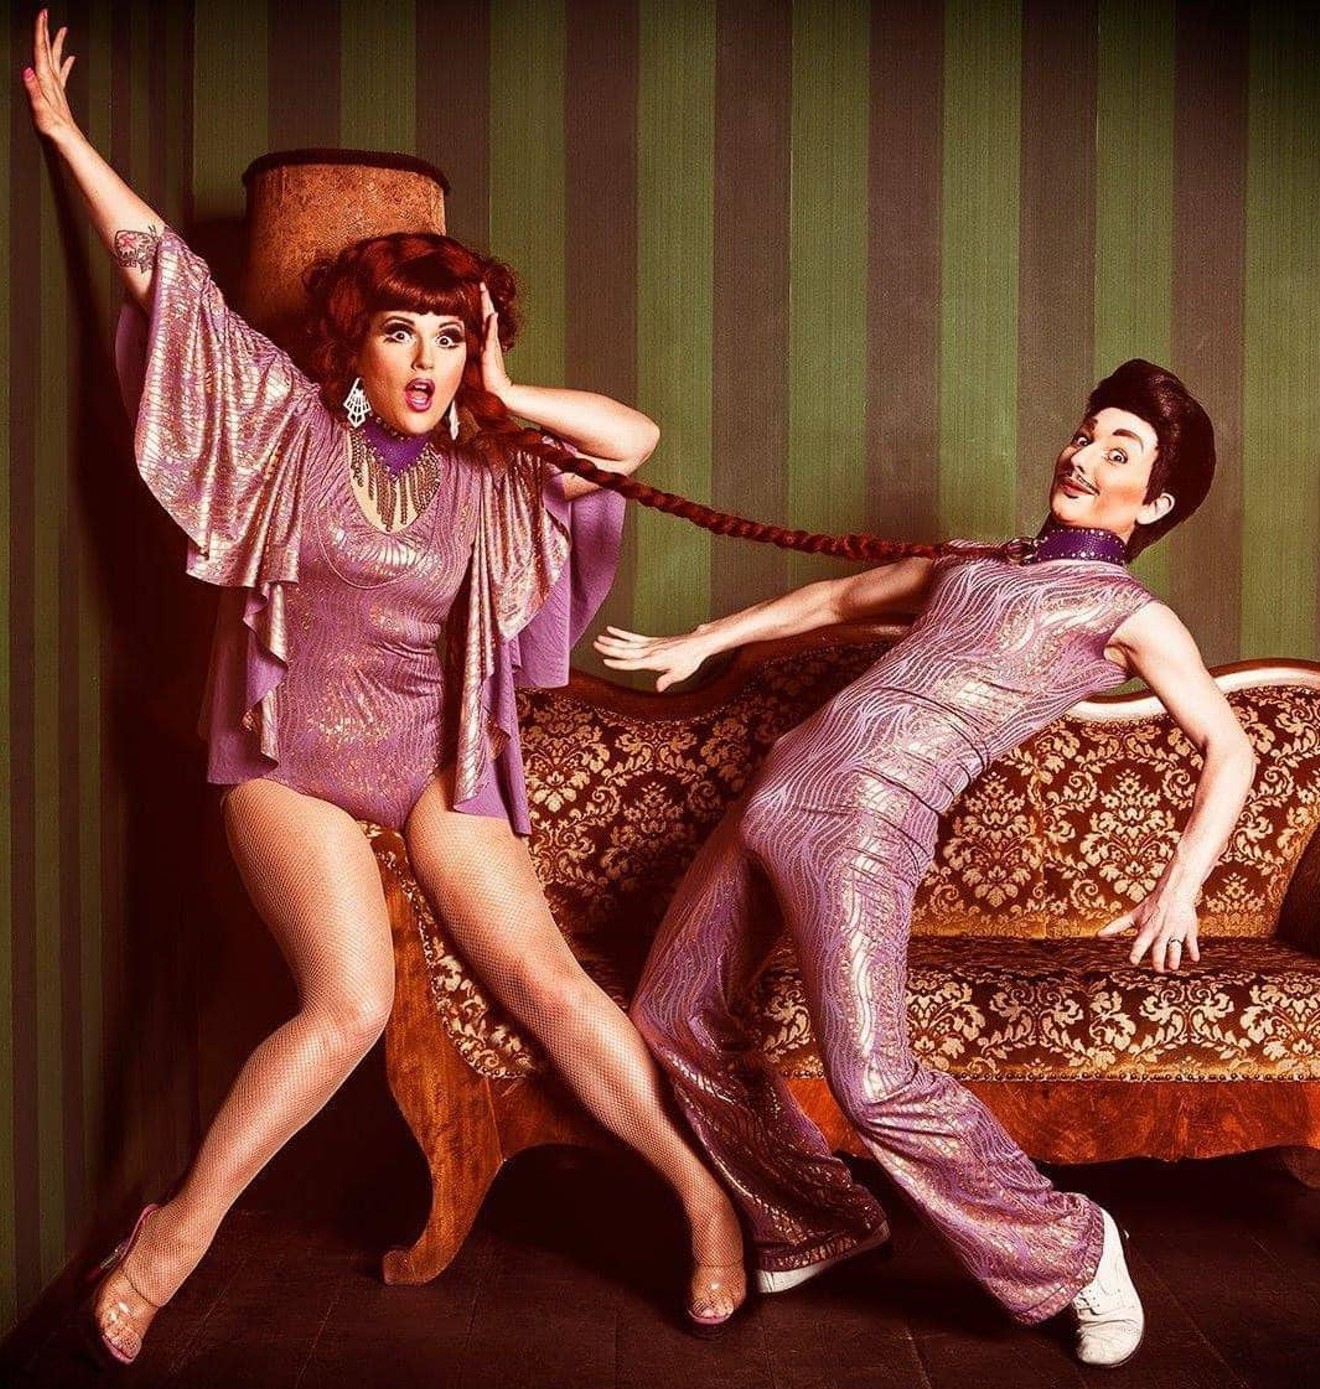 Burlesque duo Kitten N Lou is one of this year's five headlining acts.